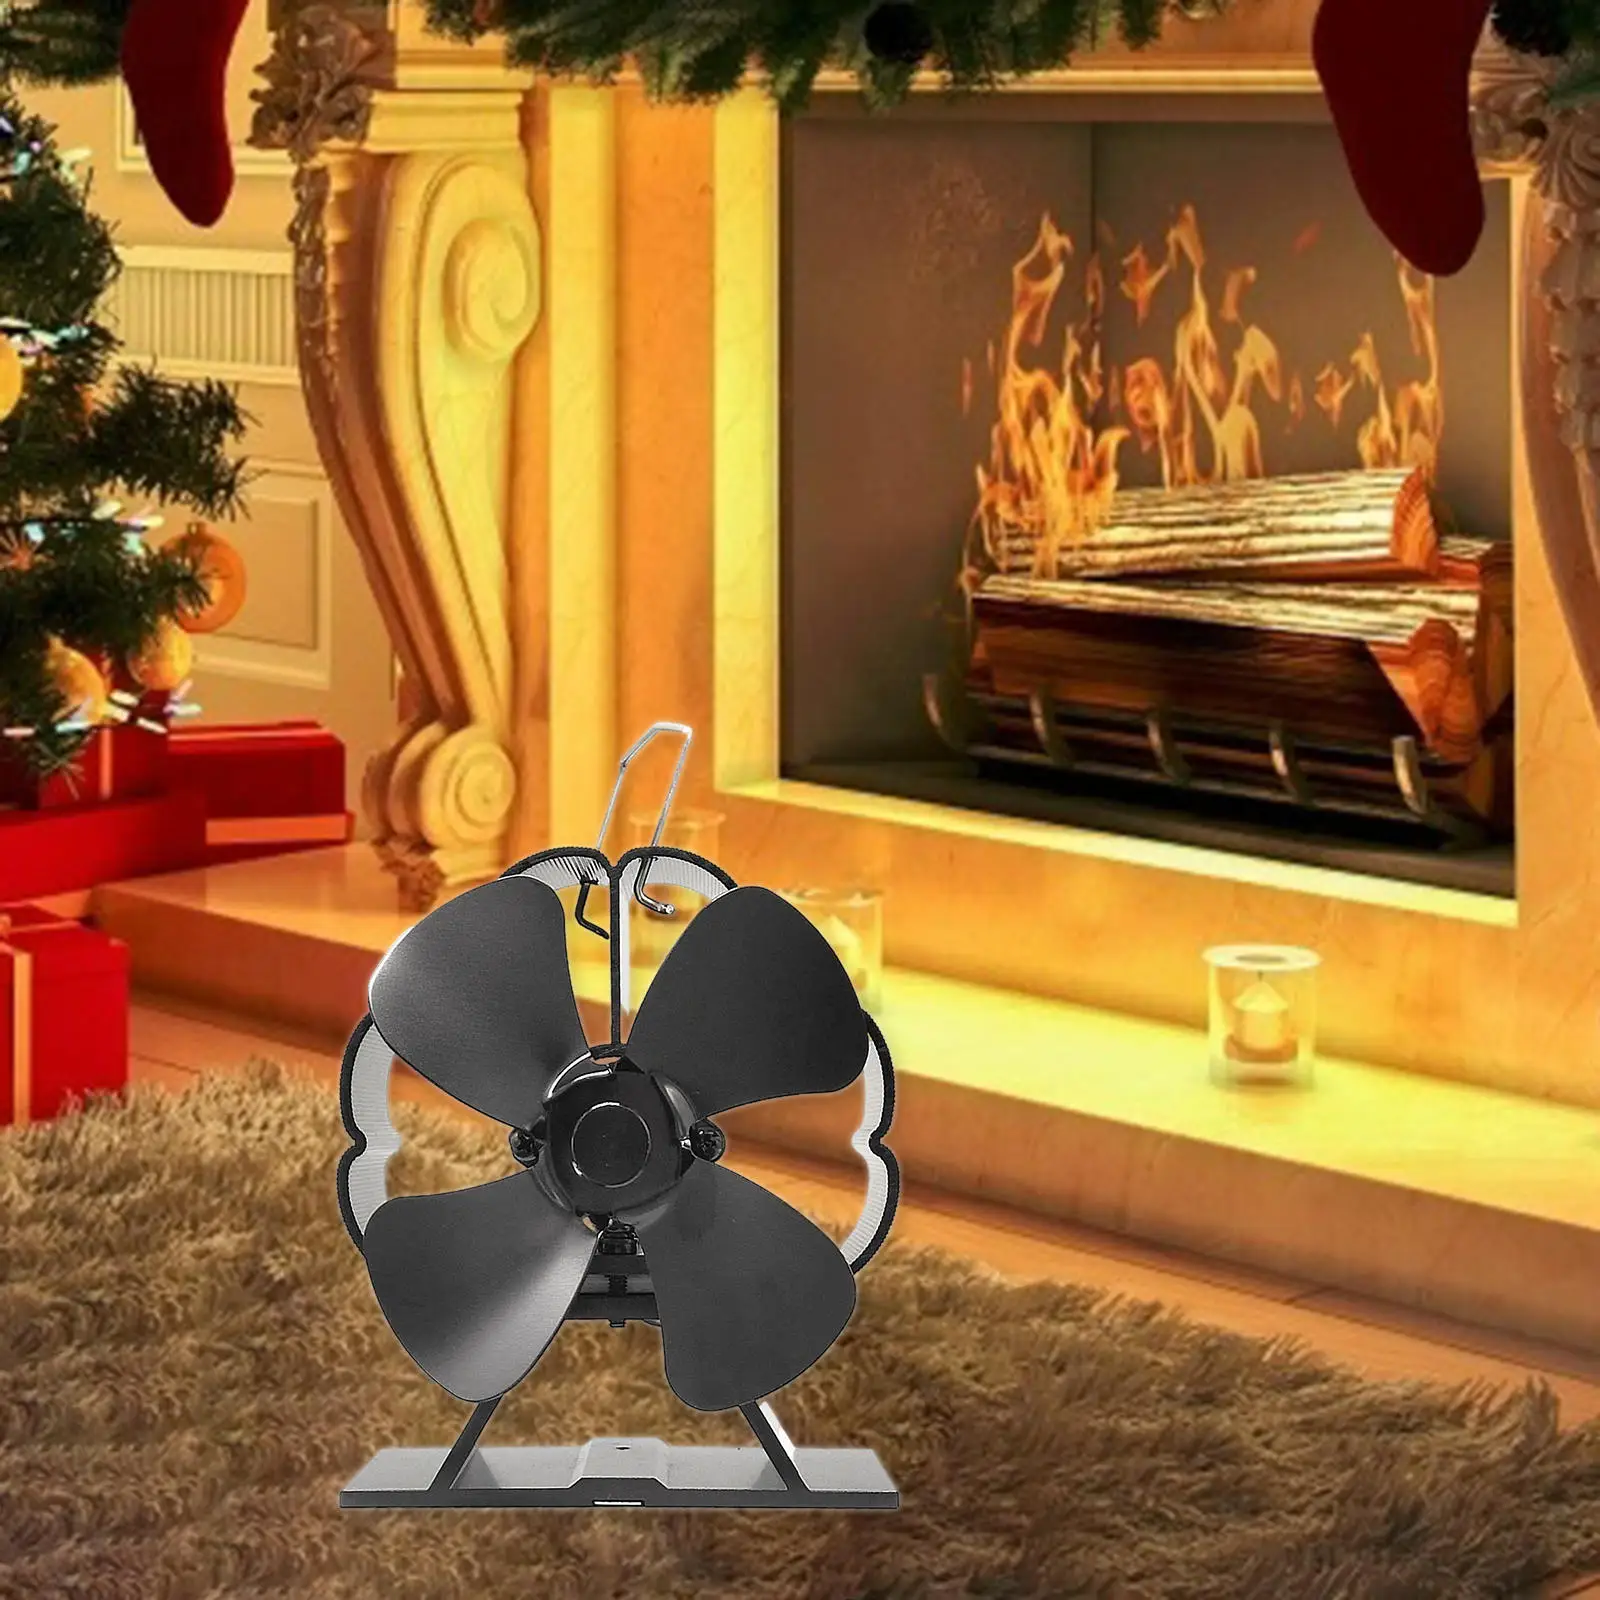 Heat Powered Stove Fan 4 Blade Heater Stove Fans Silent Eco-friendly Efficient Heat Distribution for Wood Log Burner